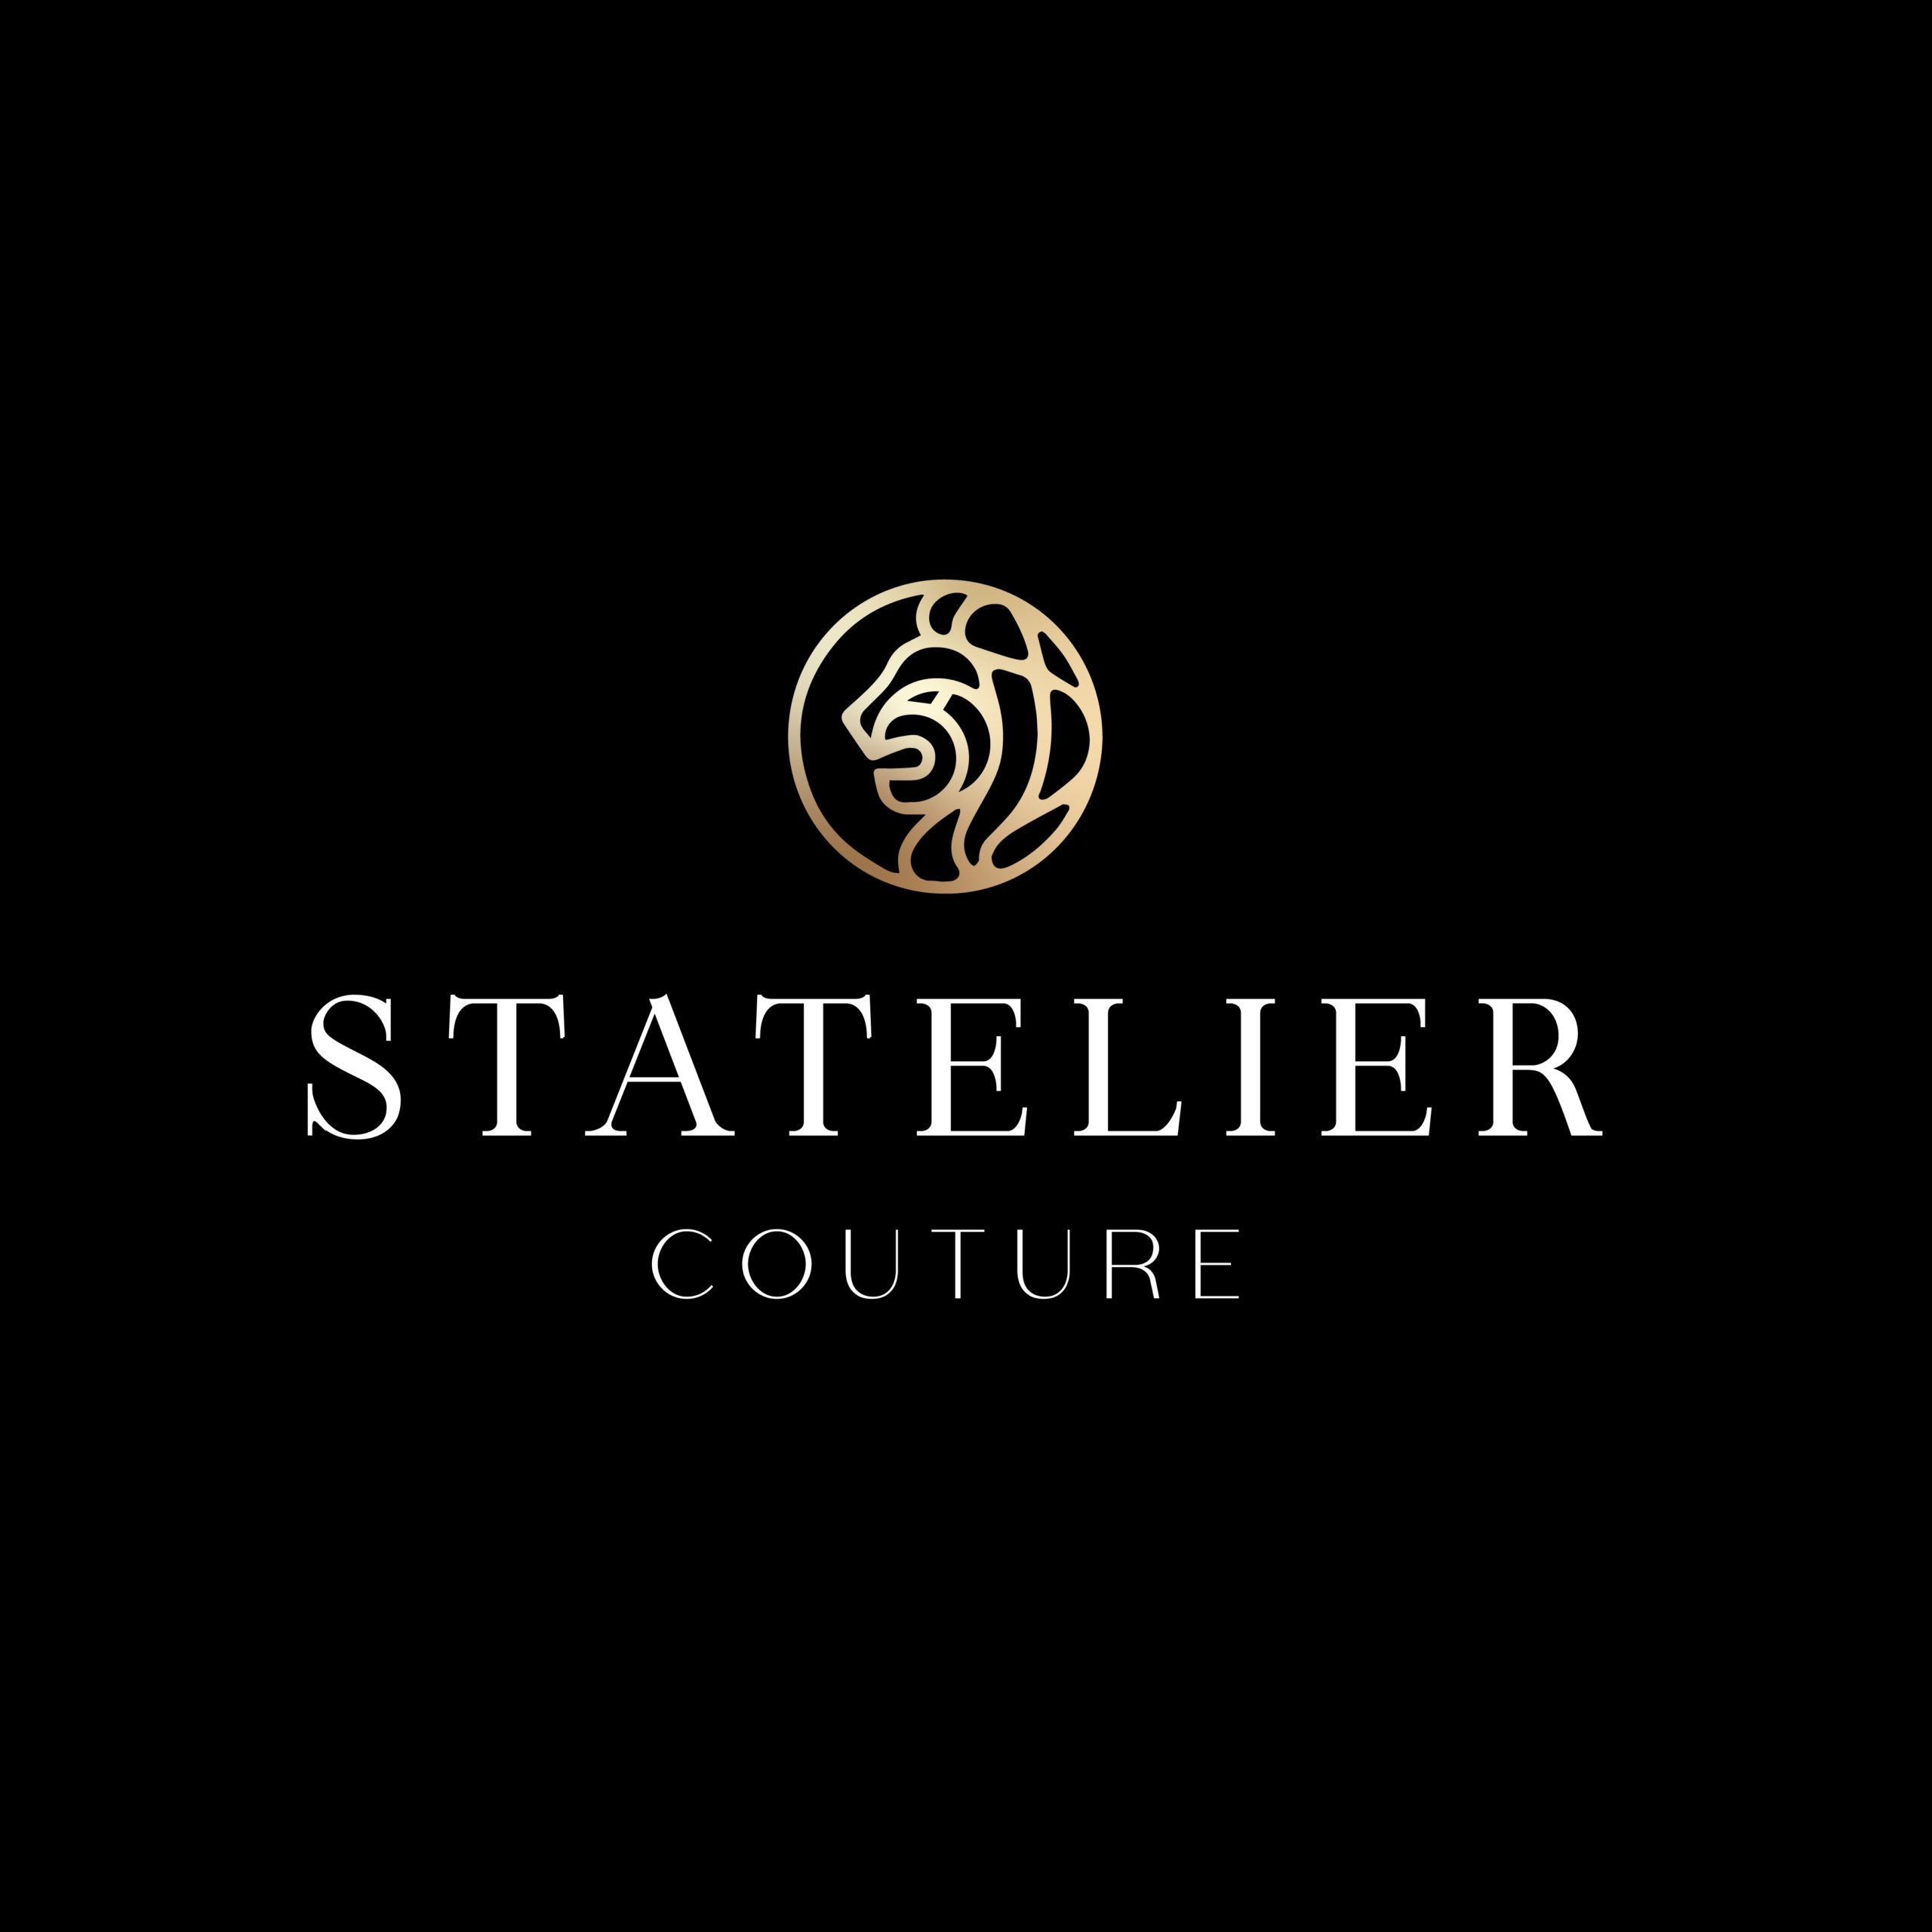 Statelier Couture